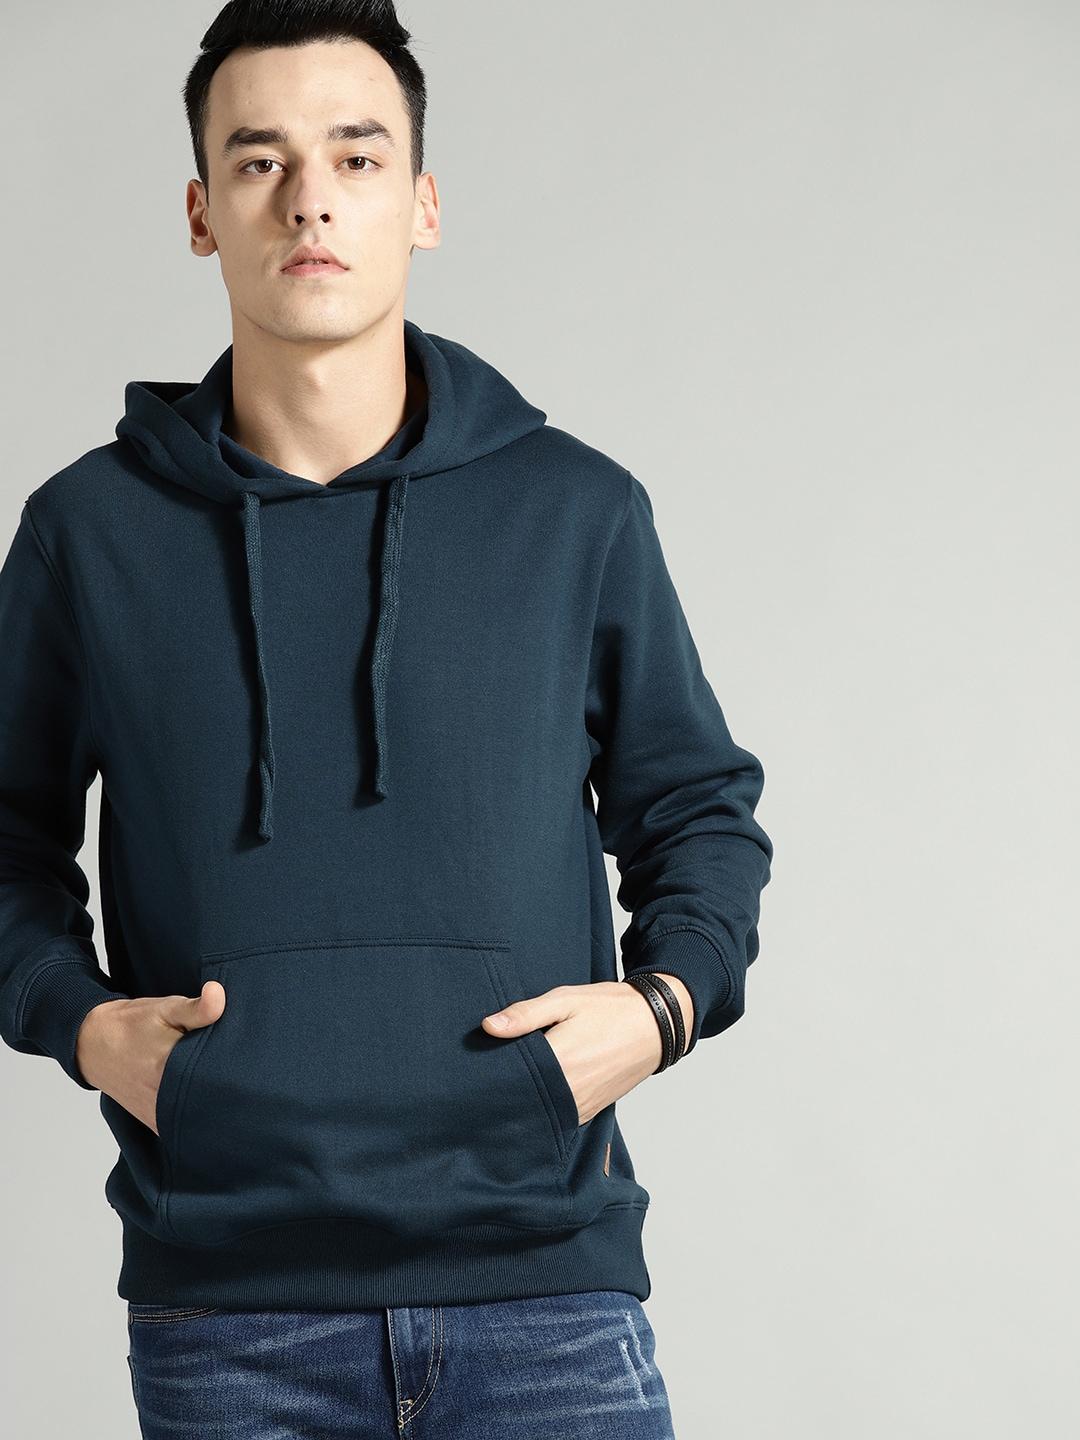 The Roadster Lifestyle Co Men Navy Blue Solid Hooded Sweatshirt